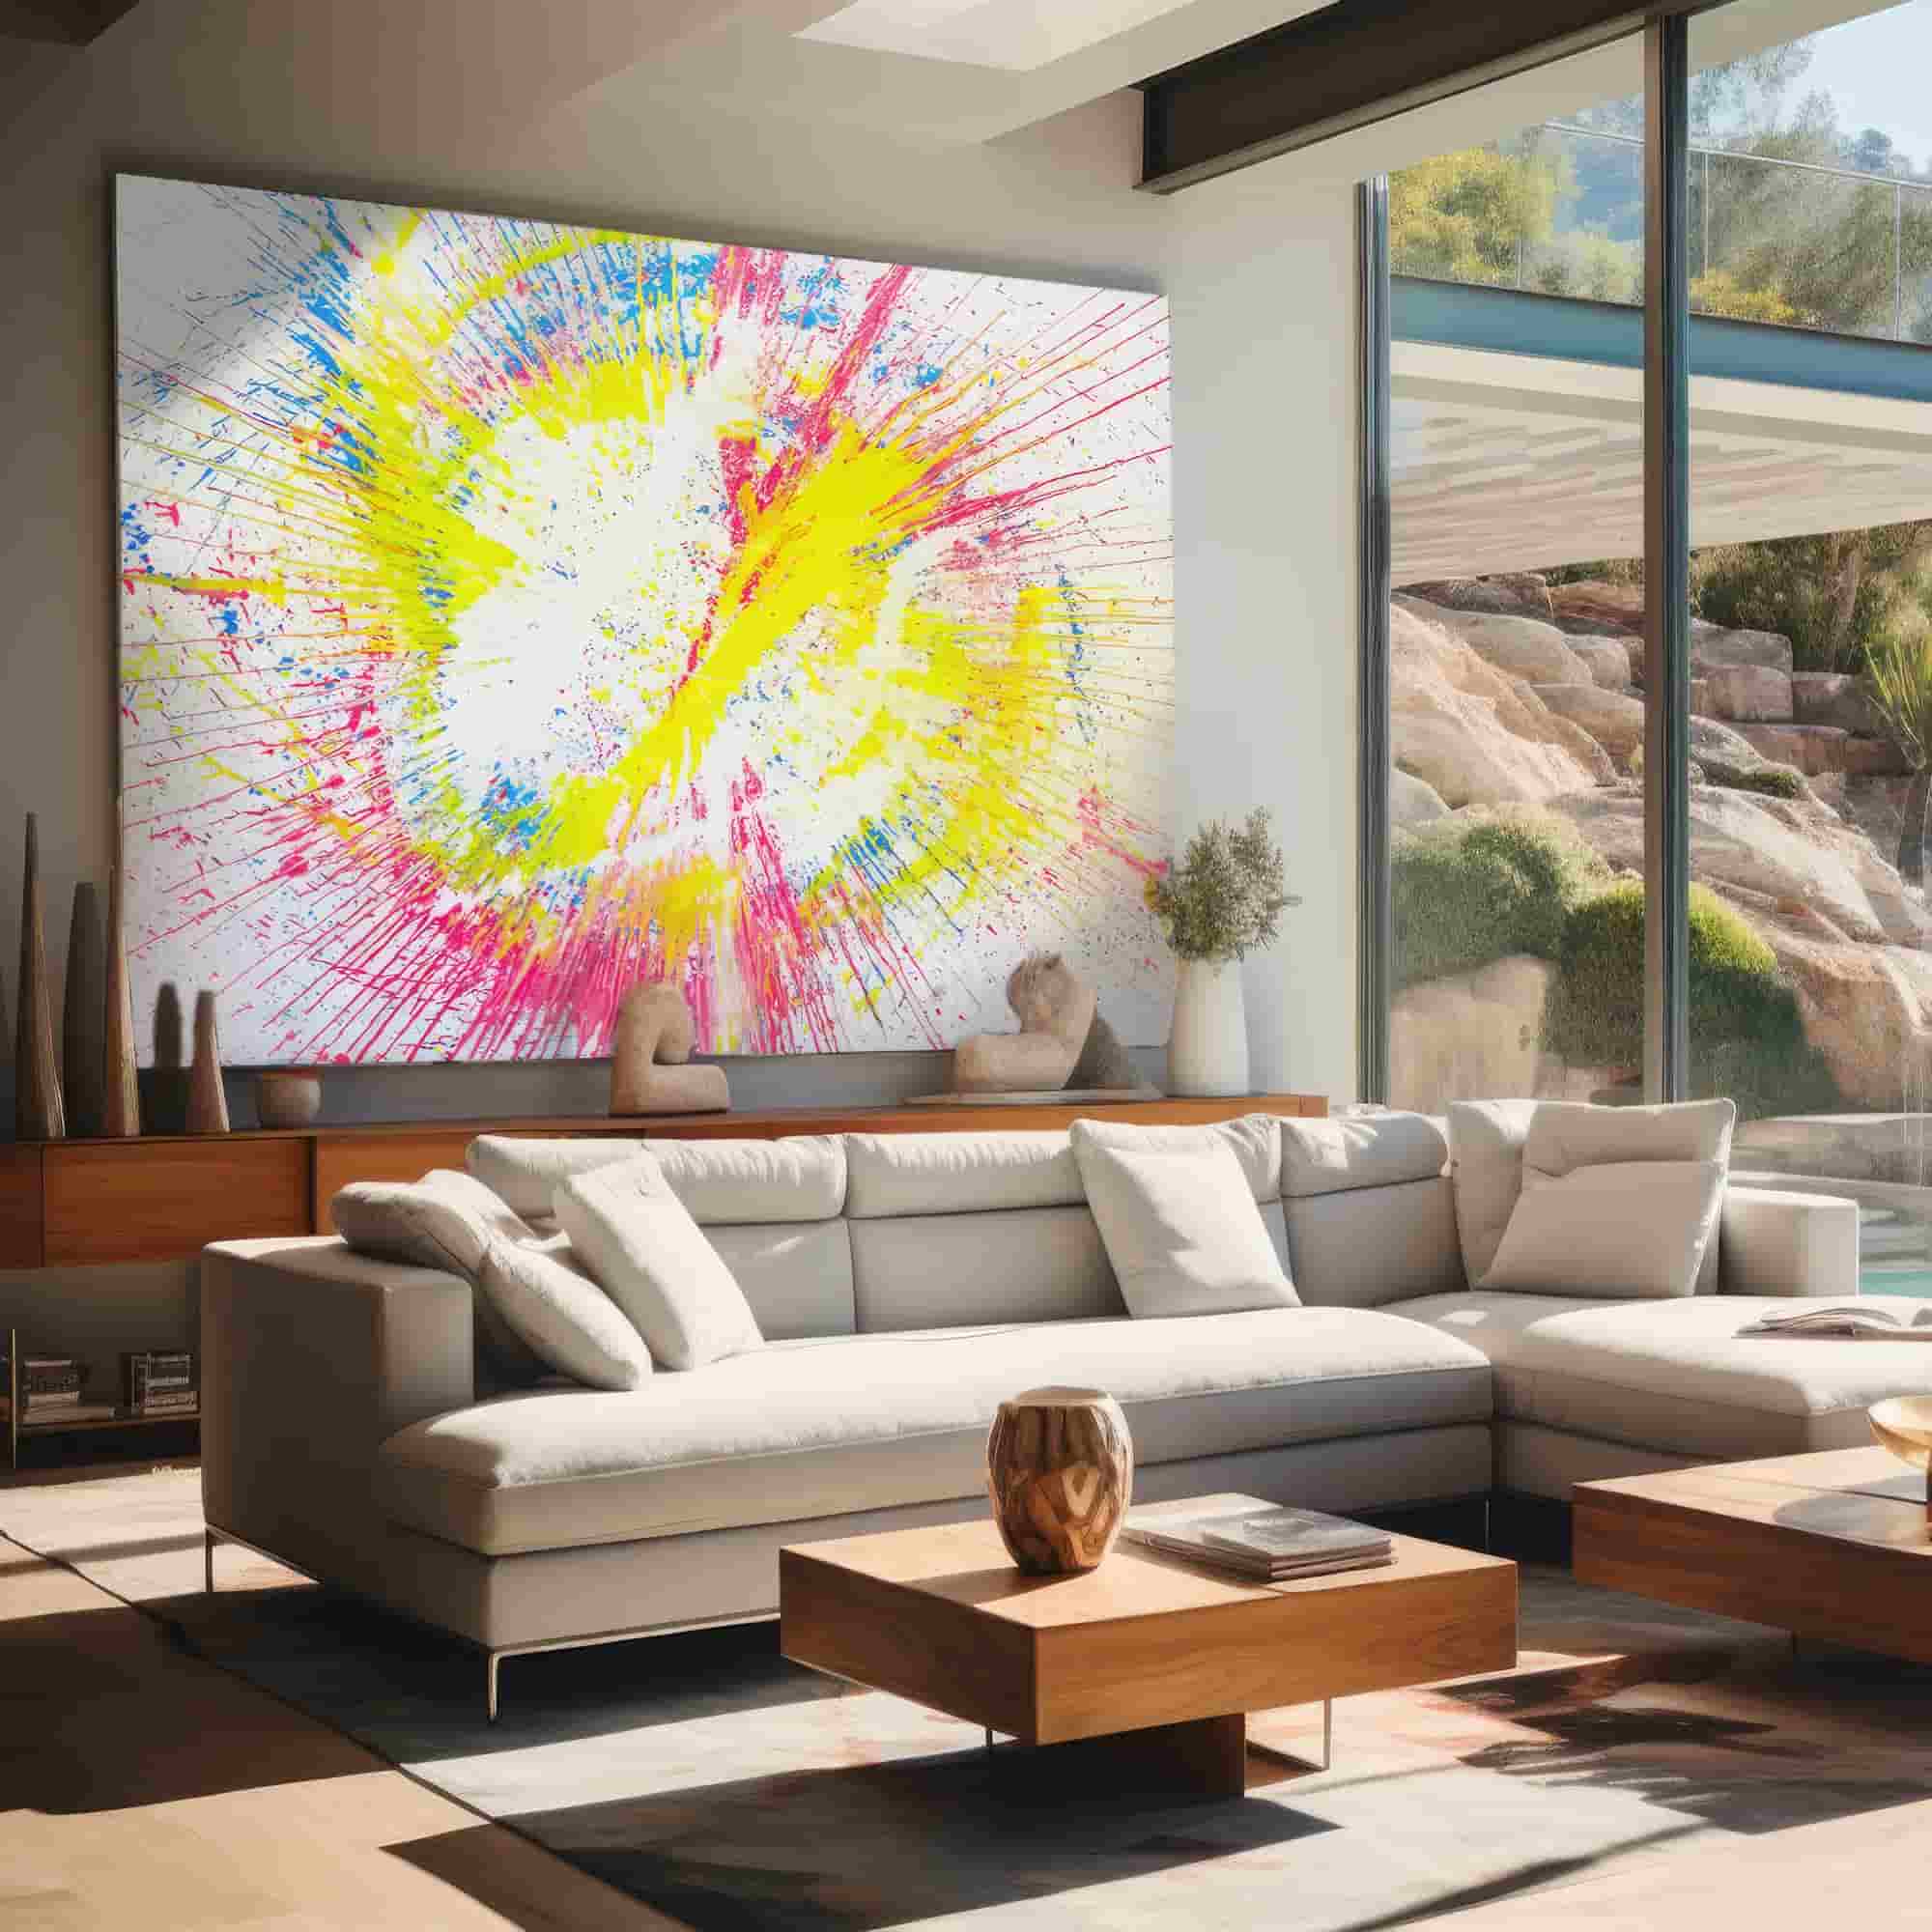 Worlds largest glow in the dark spin art hanging in a bright large living room